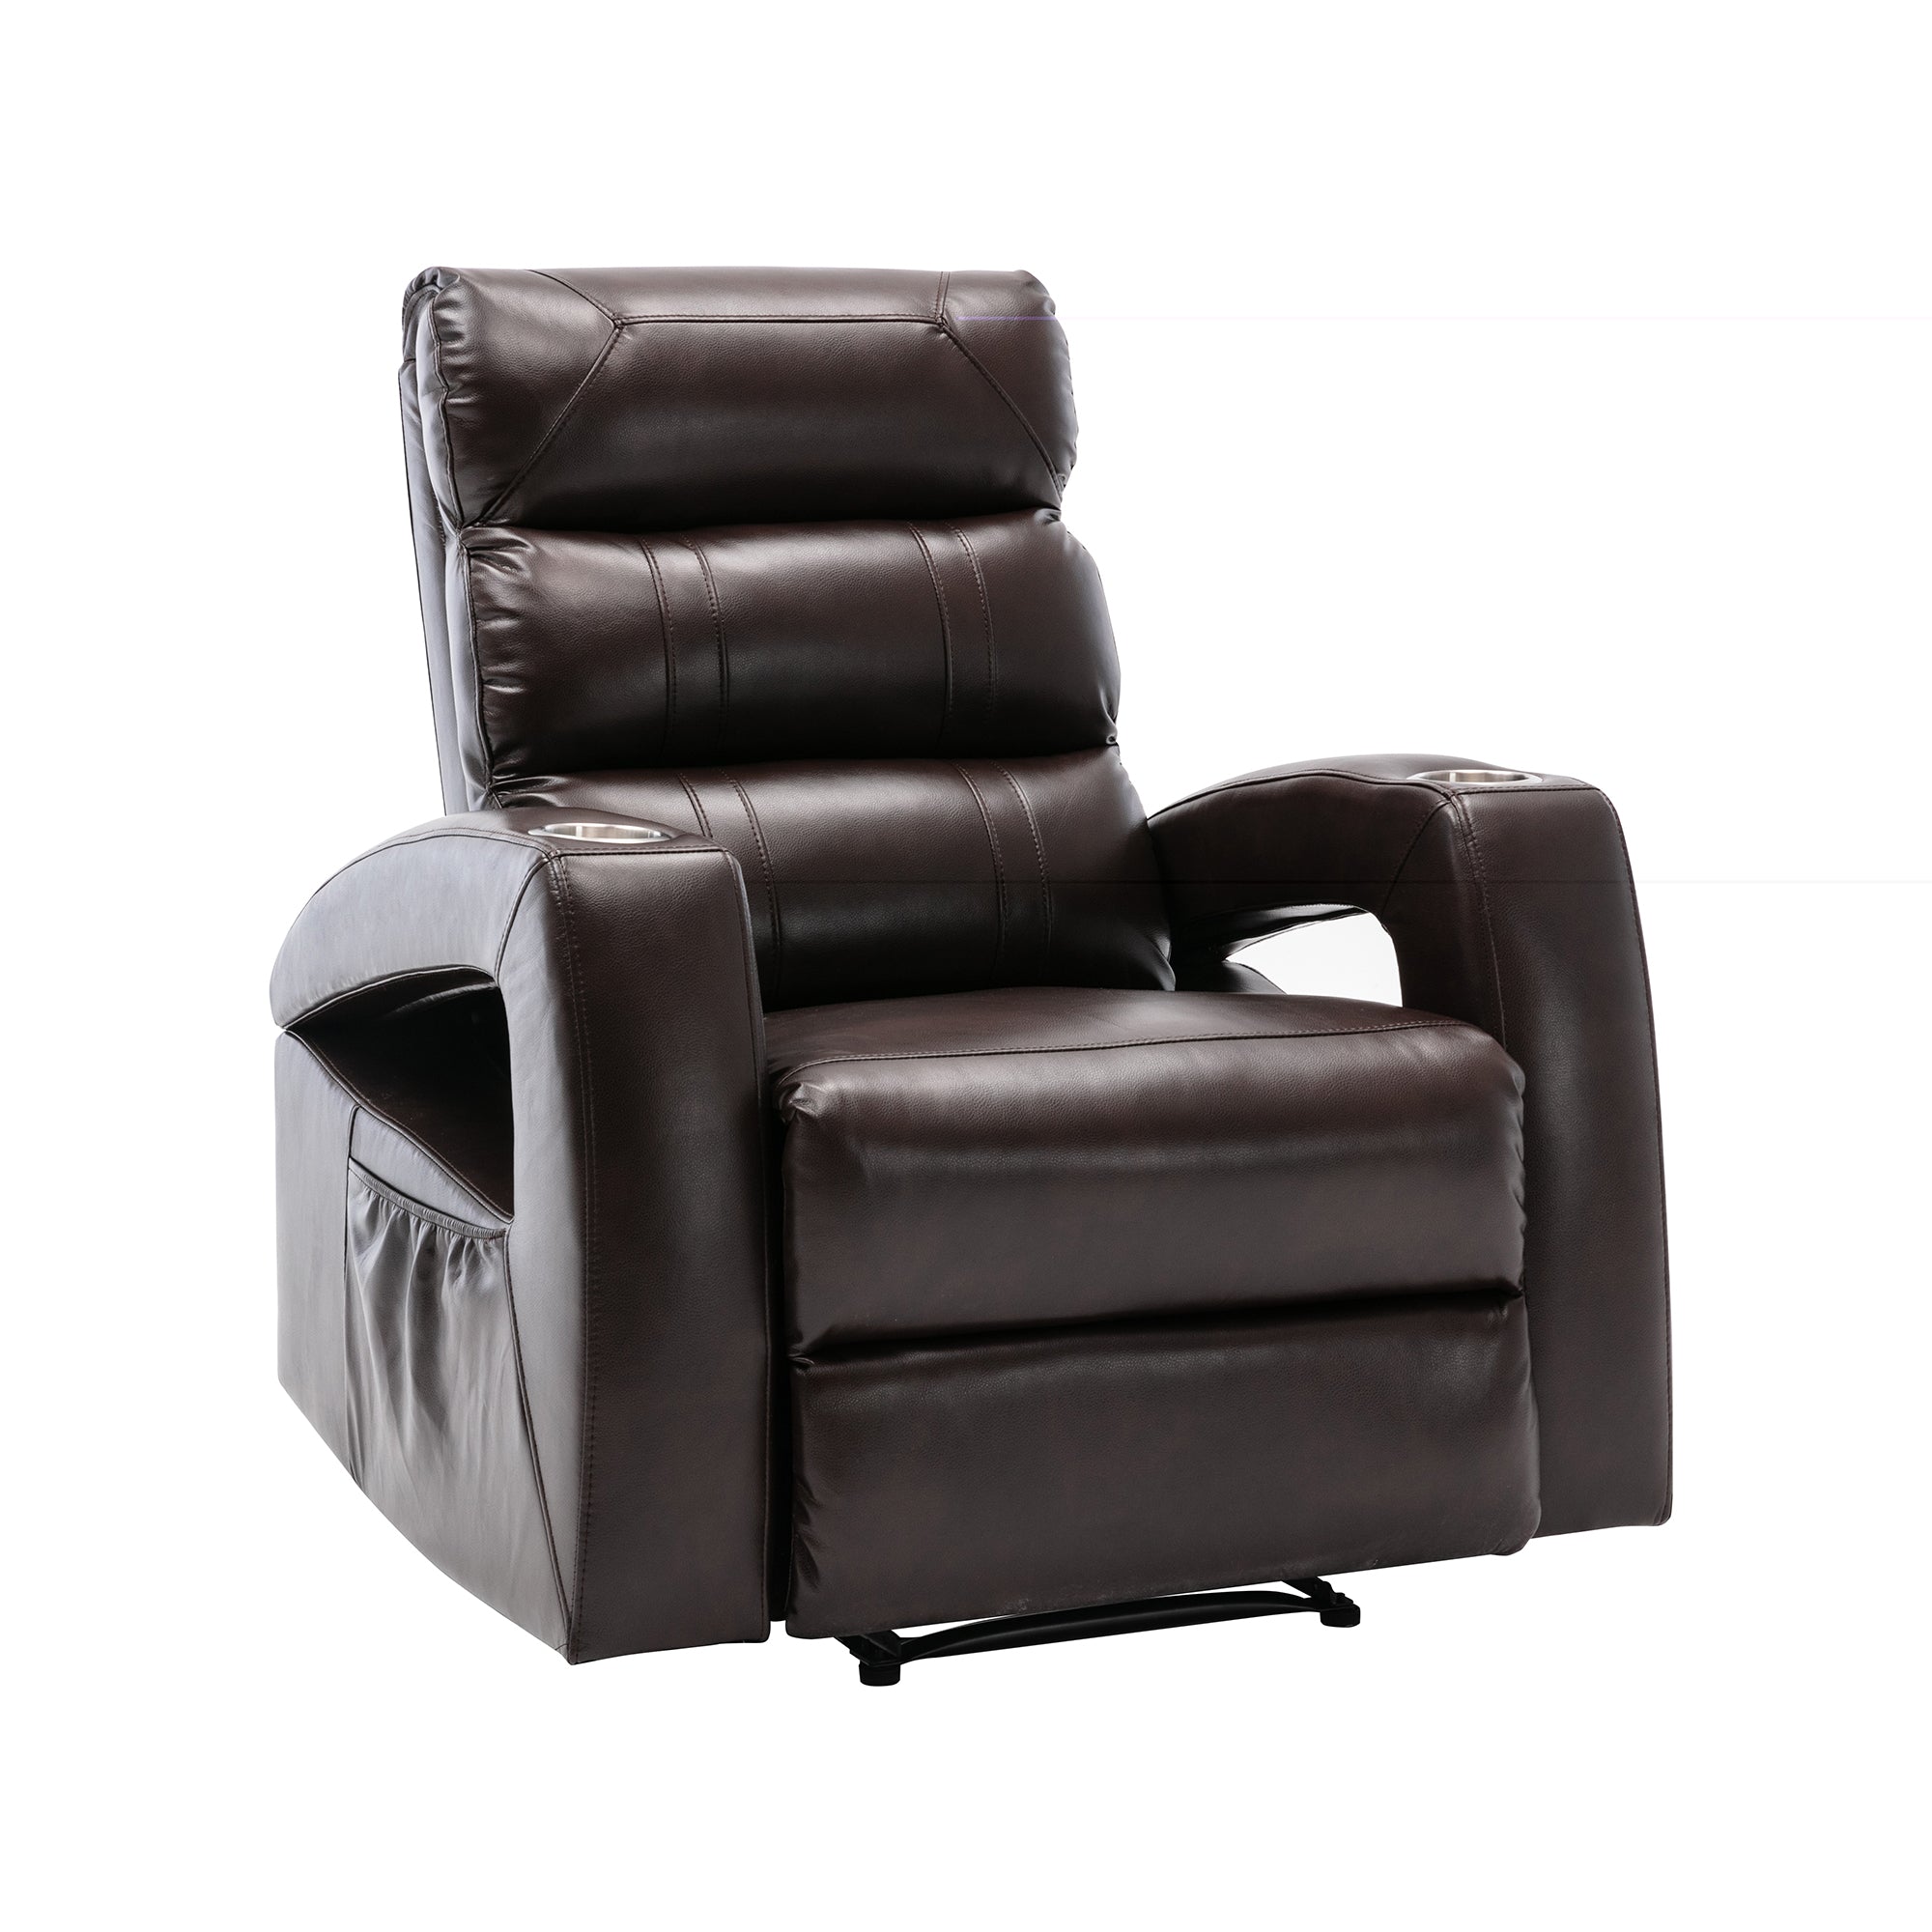 Power Motion Recliner with USB Charge Port and Two Cup Holders -PU Leather Lounge chair-Boyel Living